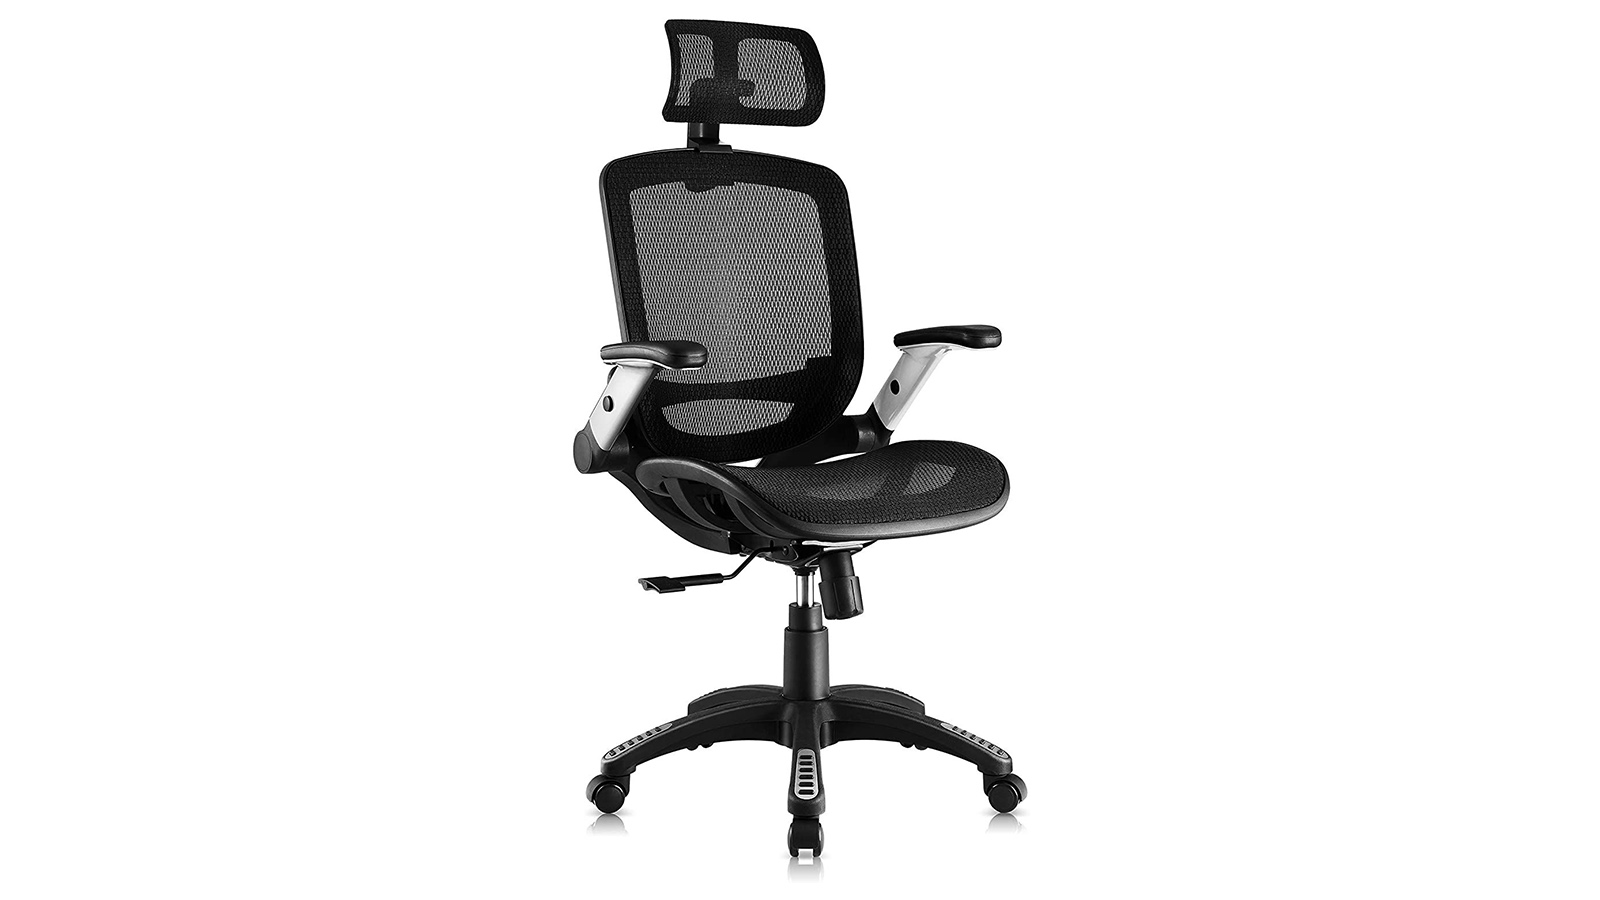 Lumbar Support Gabrylly Office Mesh Chair Ergonomic Desk Chair Swivel Computer Task Chair for Home Office Tilt Back Adjustable Headrest with Flip-Up Arms 